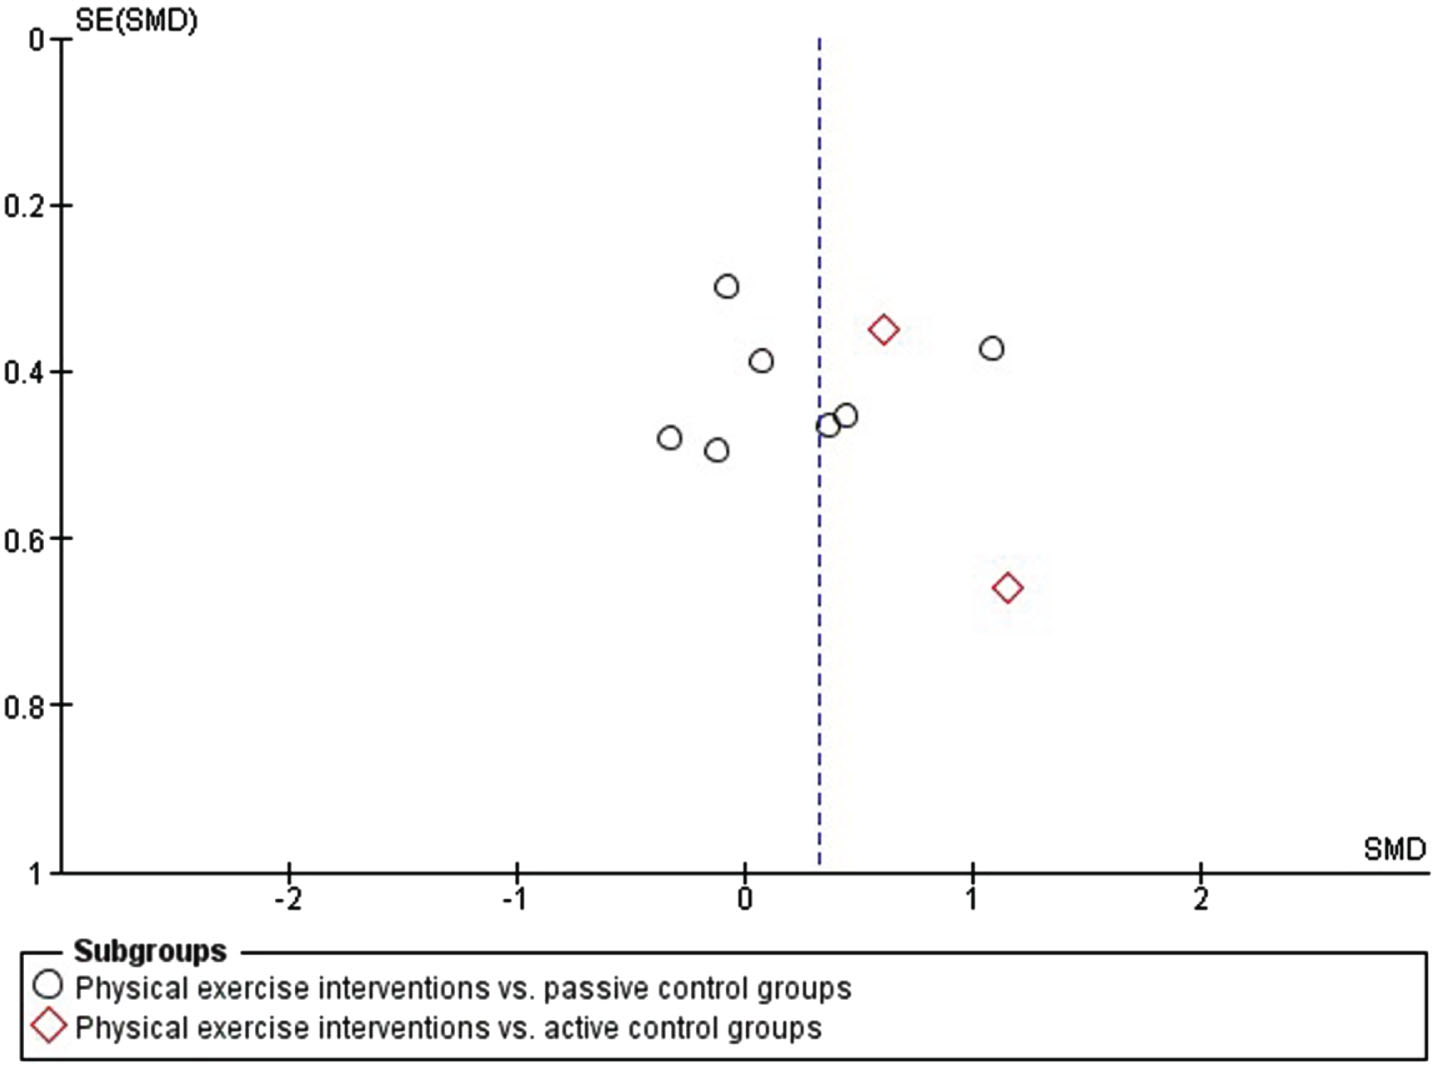 Funnel plot: Physical exercise vs. passive and active control groups.